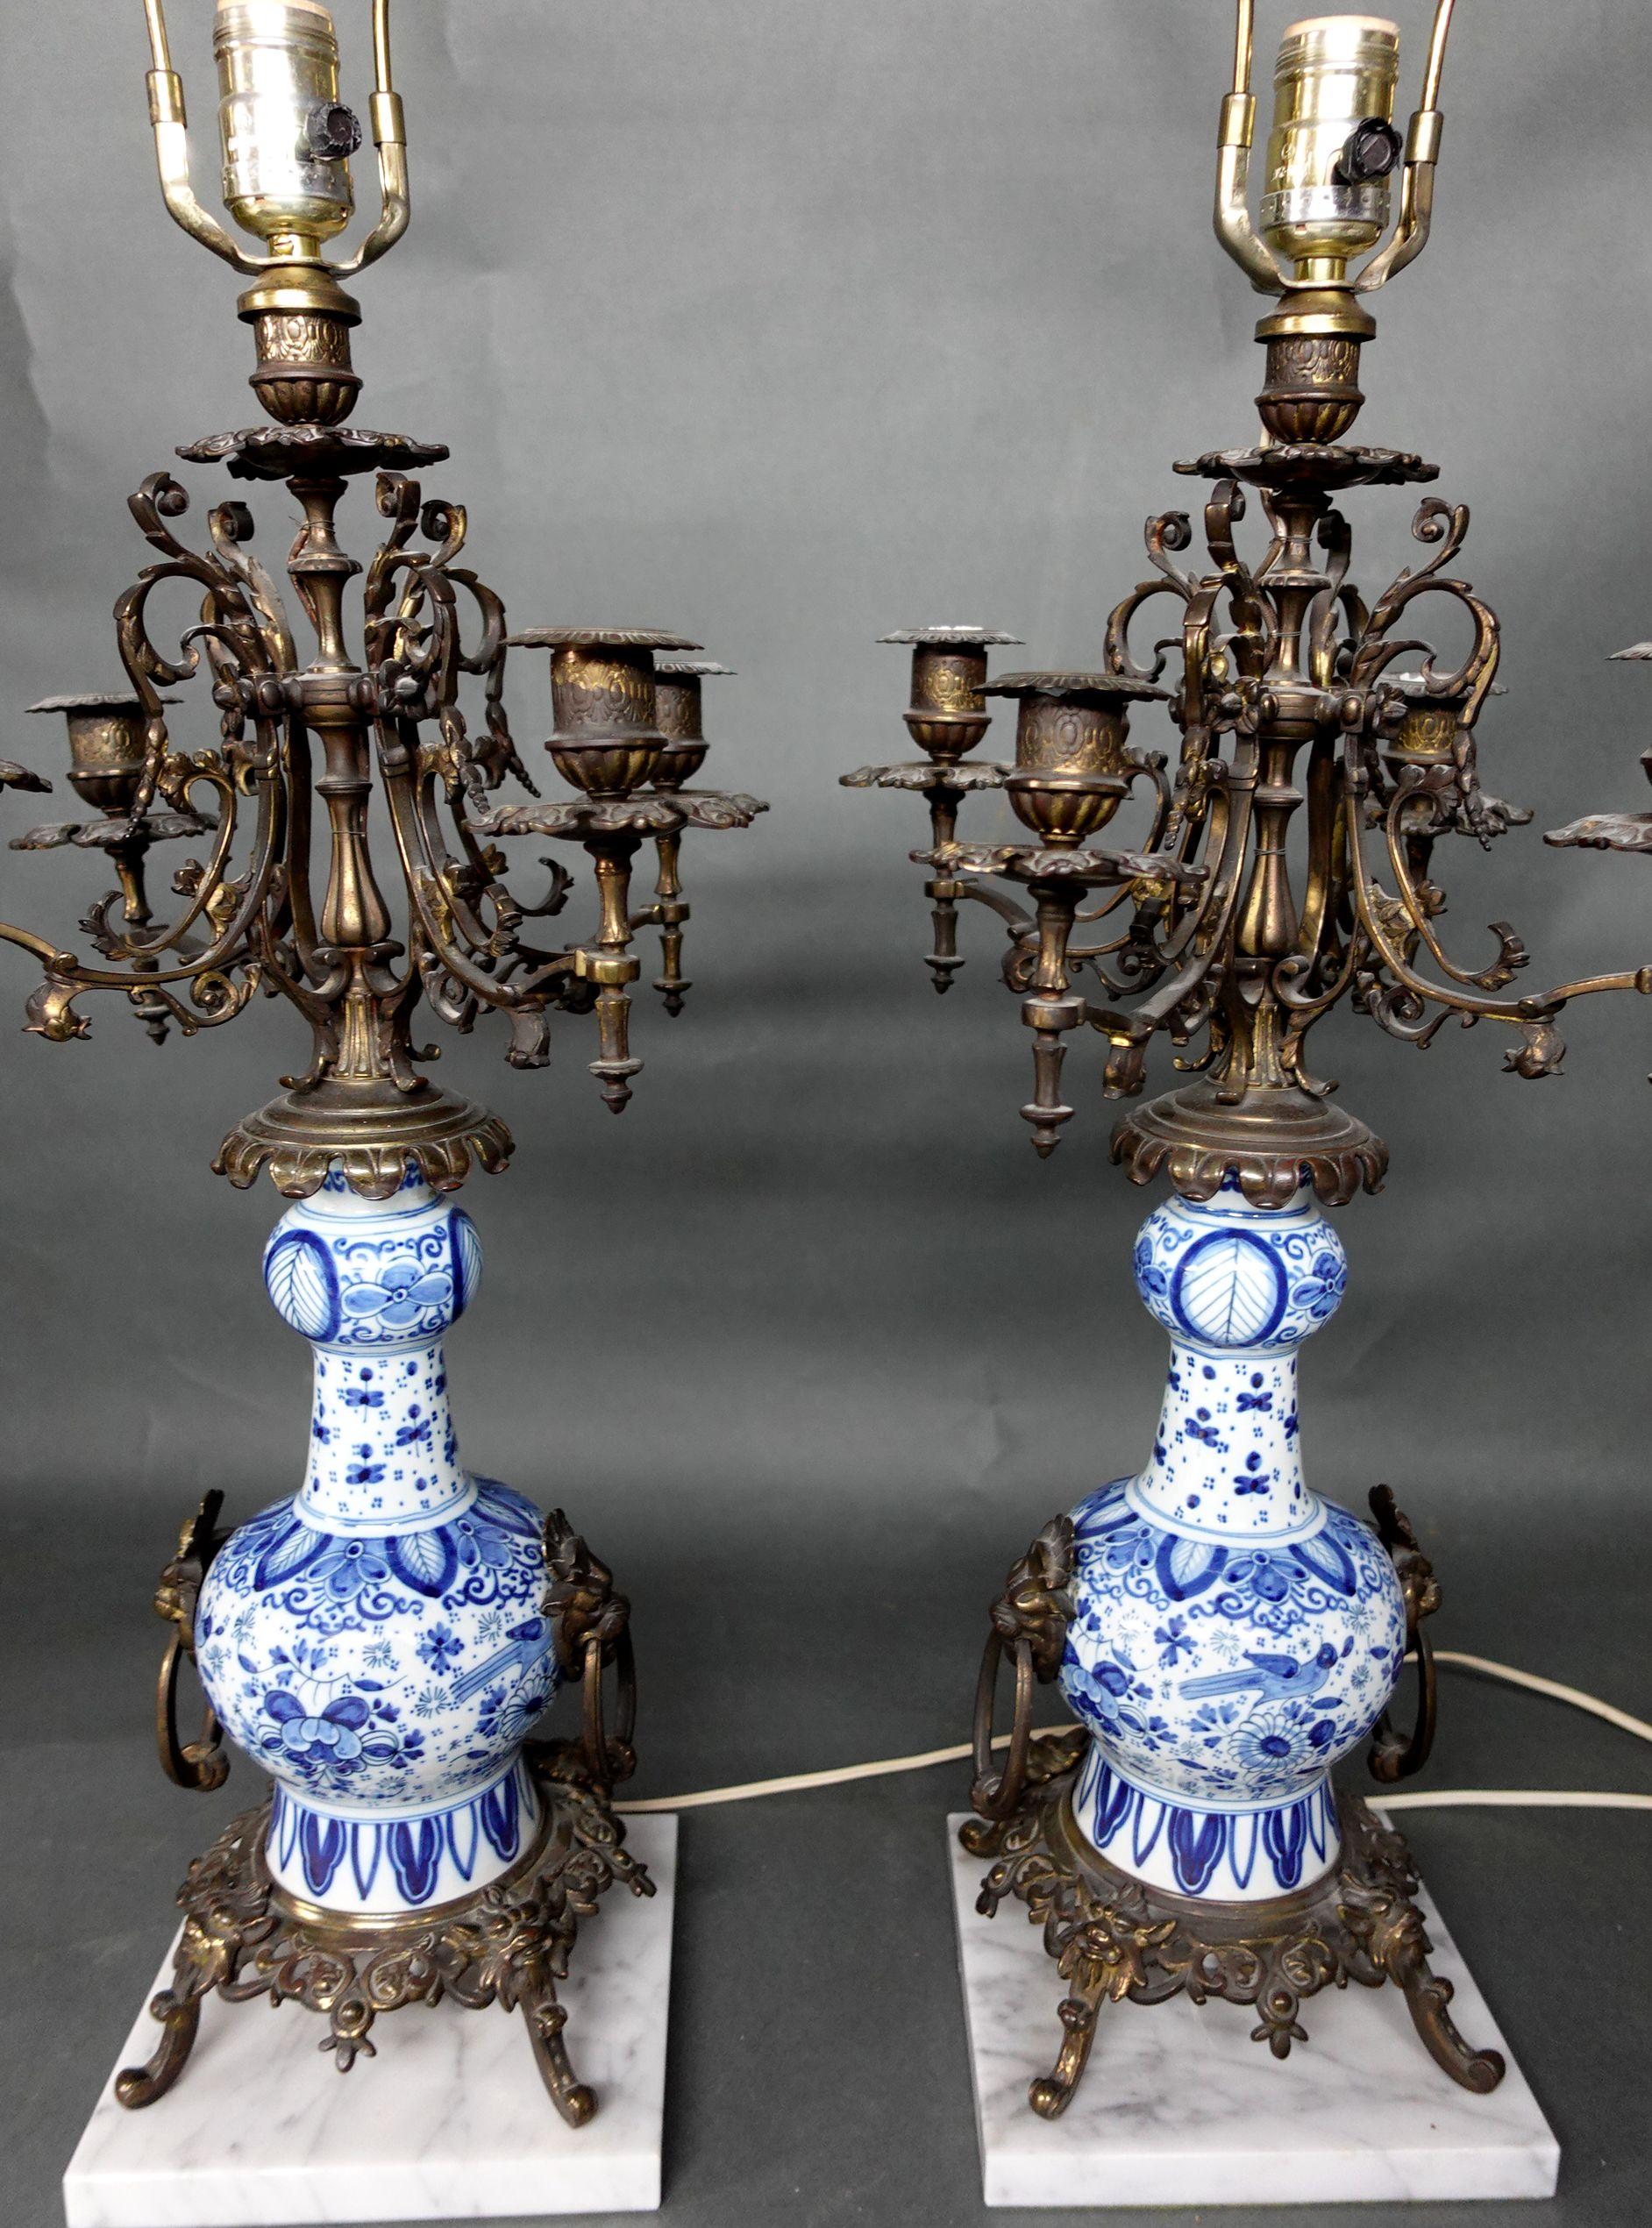 Pair of Blue and White Porcelain vases/lamp bases
mounted on metal feet and stand on a square marble base, electrified, overall ht. 31 1/2, vase ht. 10 in.
The lamps are working well.

